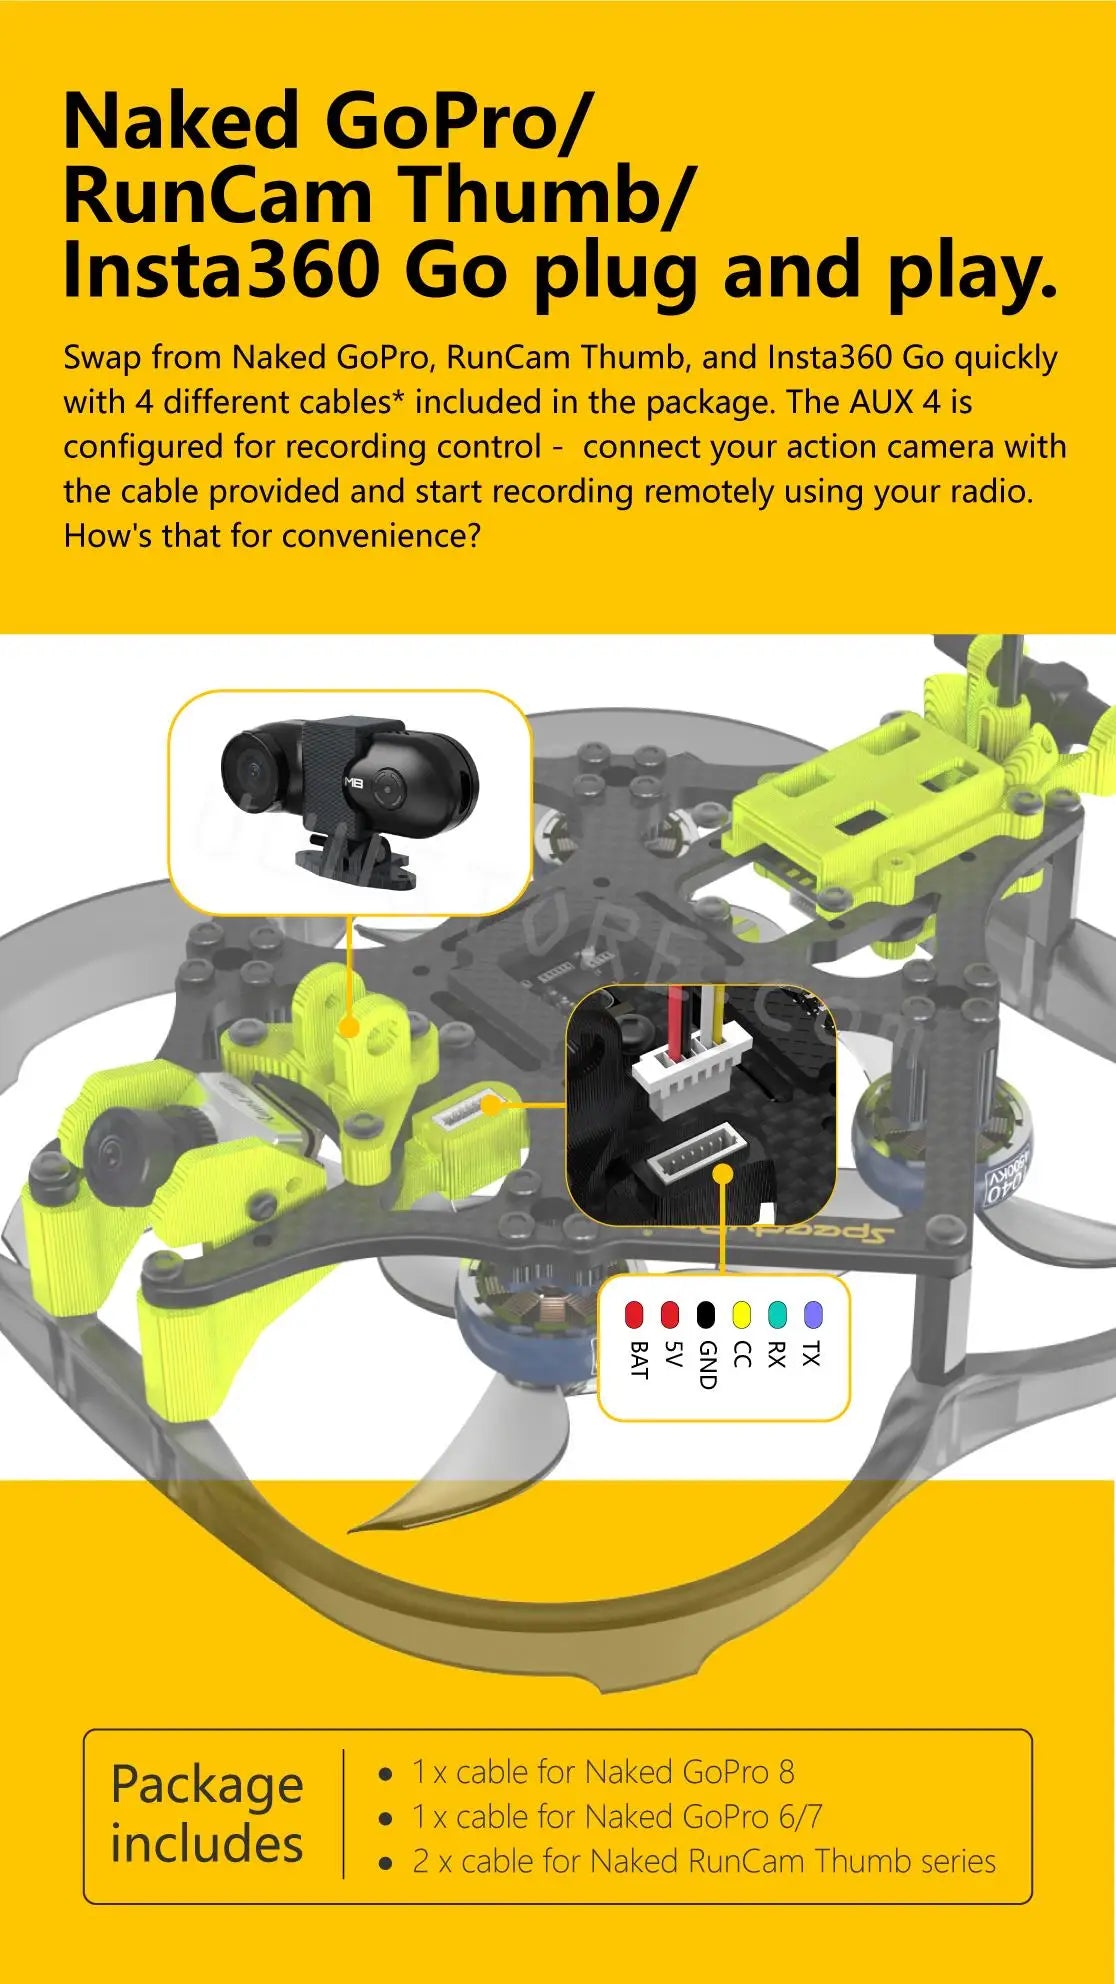 SpeedyBee Flex25 Analog, the AUX 4 is configured for recording control connect your action camera with the cable provided and